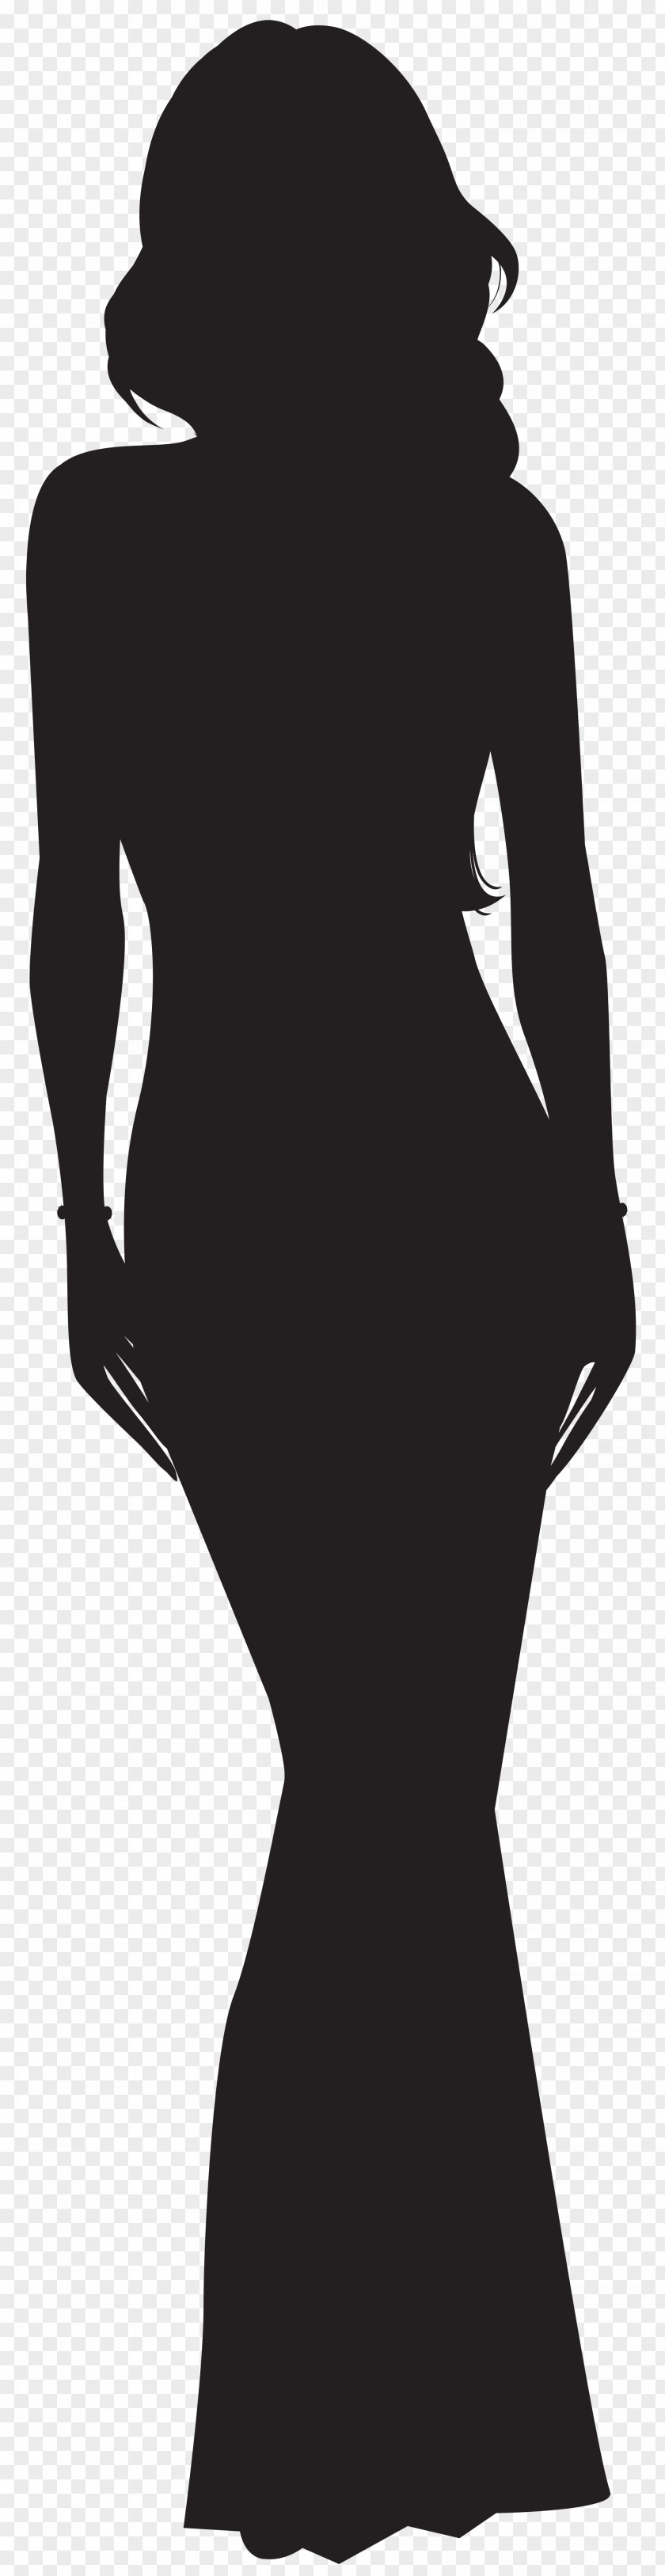 Woman Silhouette Clip Art Image Female PNG